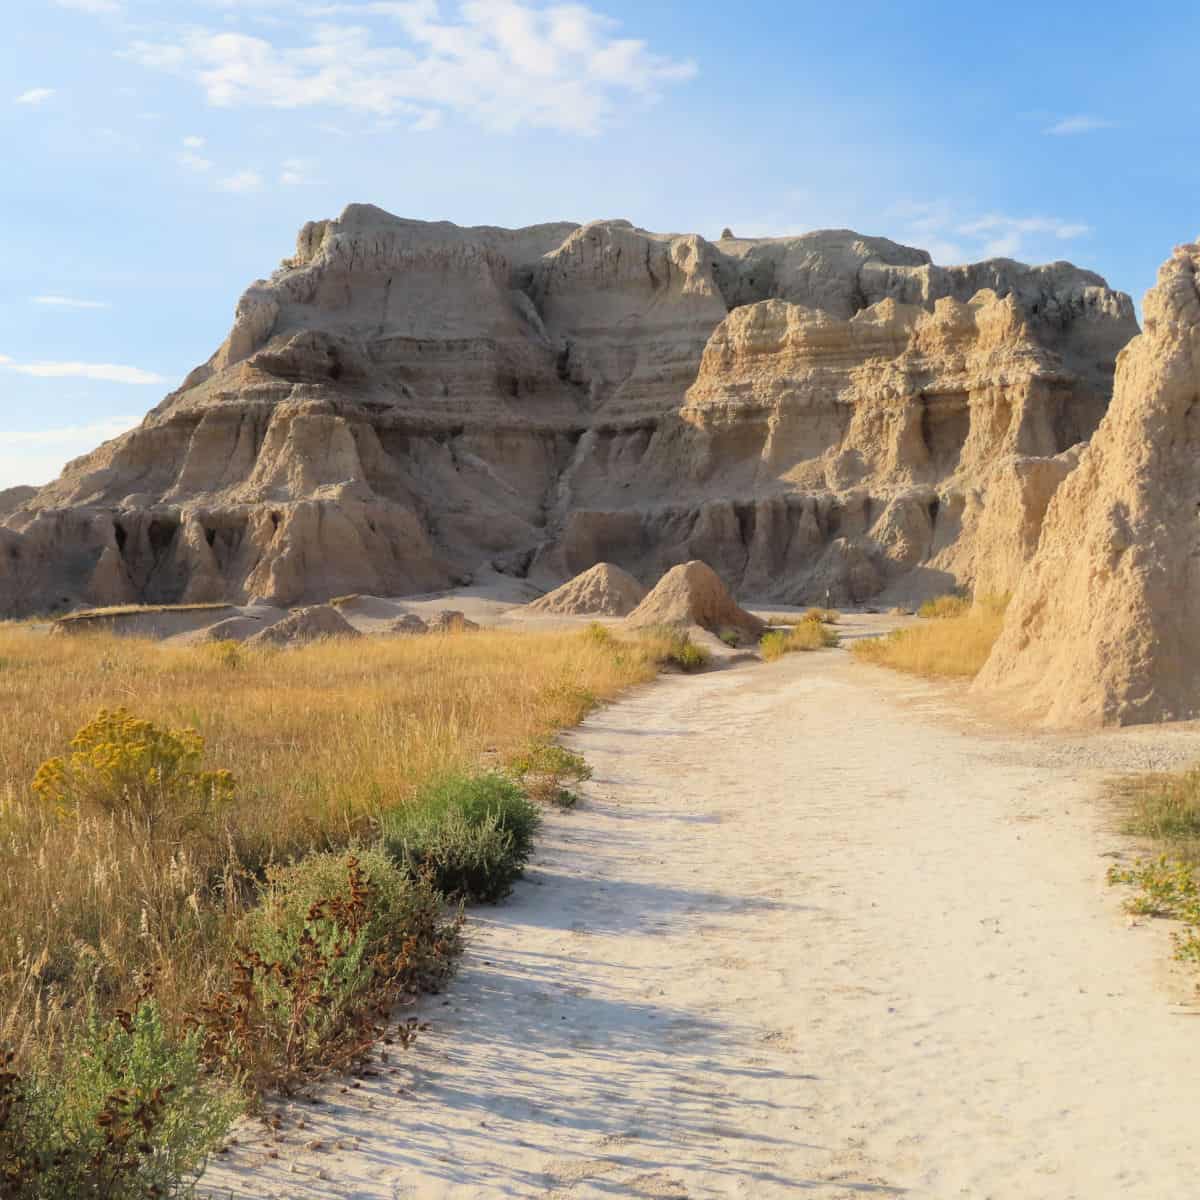 Hiking in the Badlands on the Notch Trail in Badlands National Park